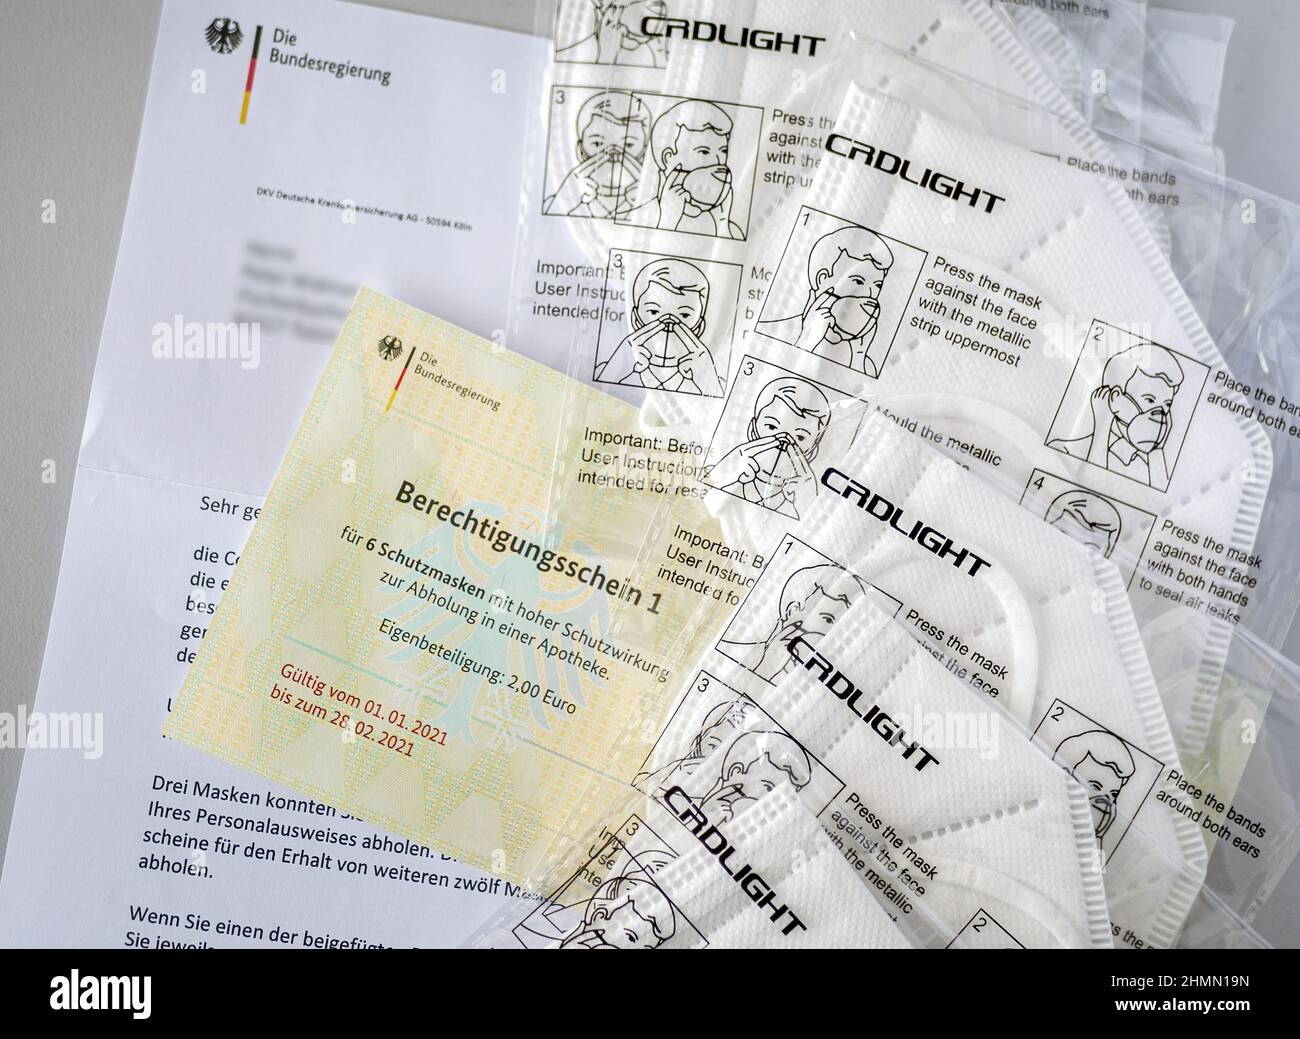 authorisation certificates for FFP2 masks from the Federal Government Germany, Germany Stock Photo